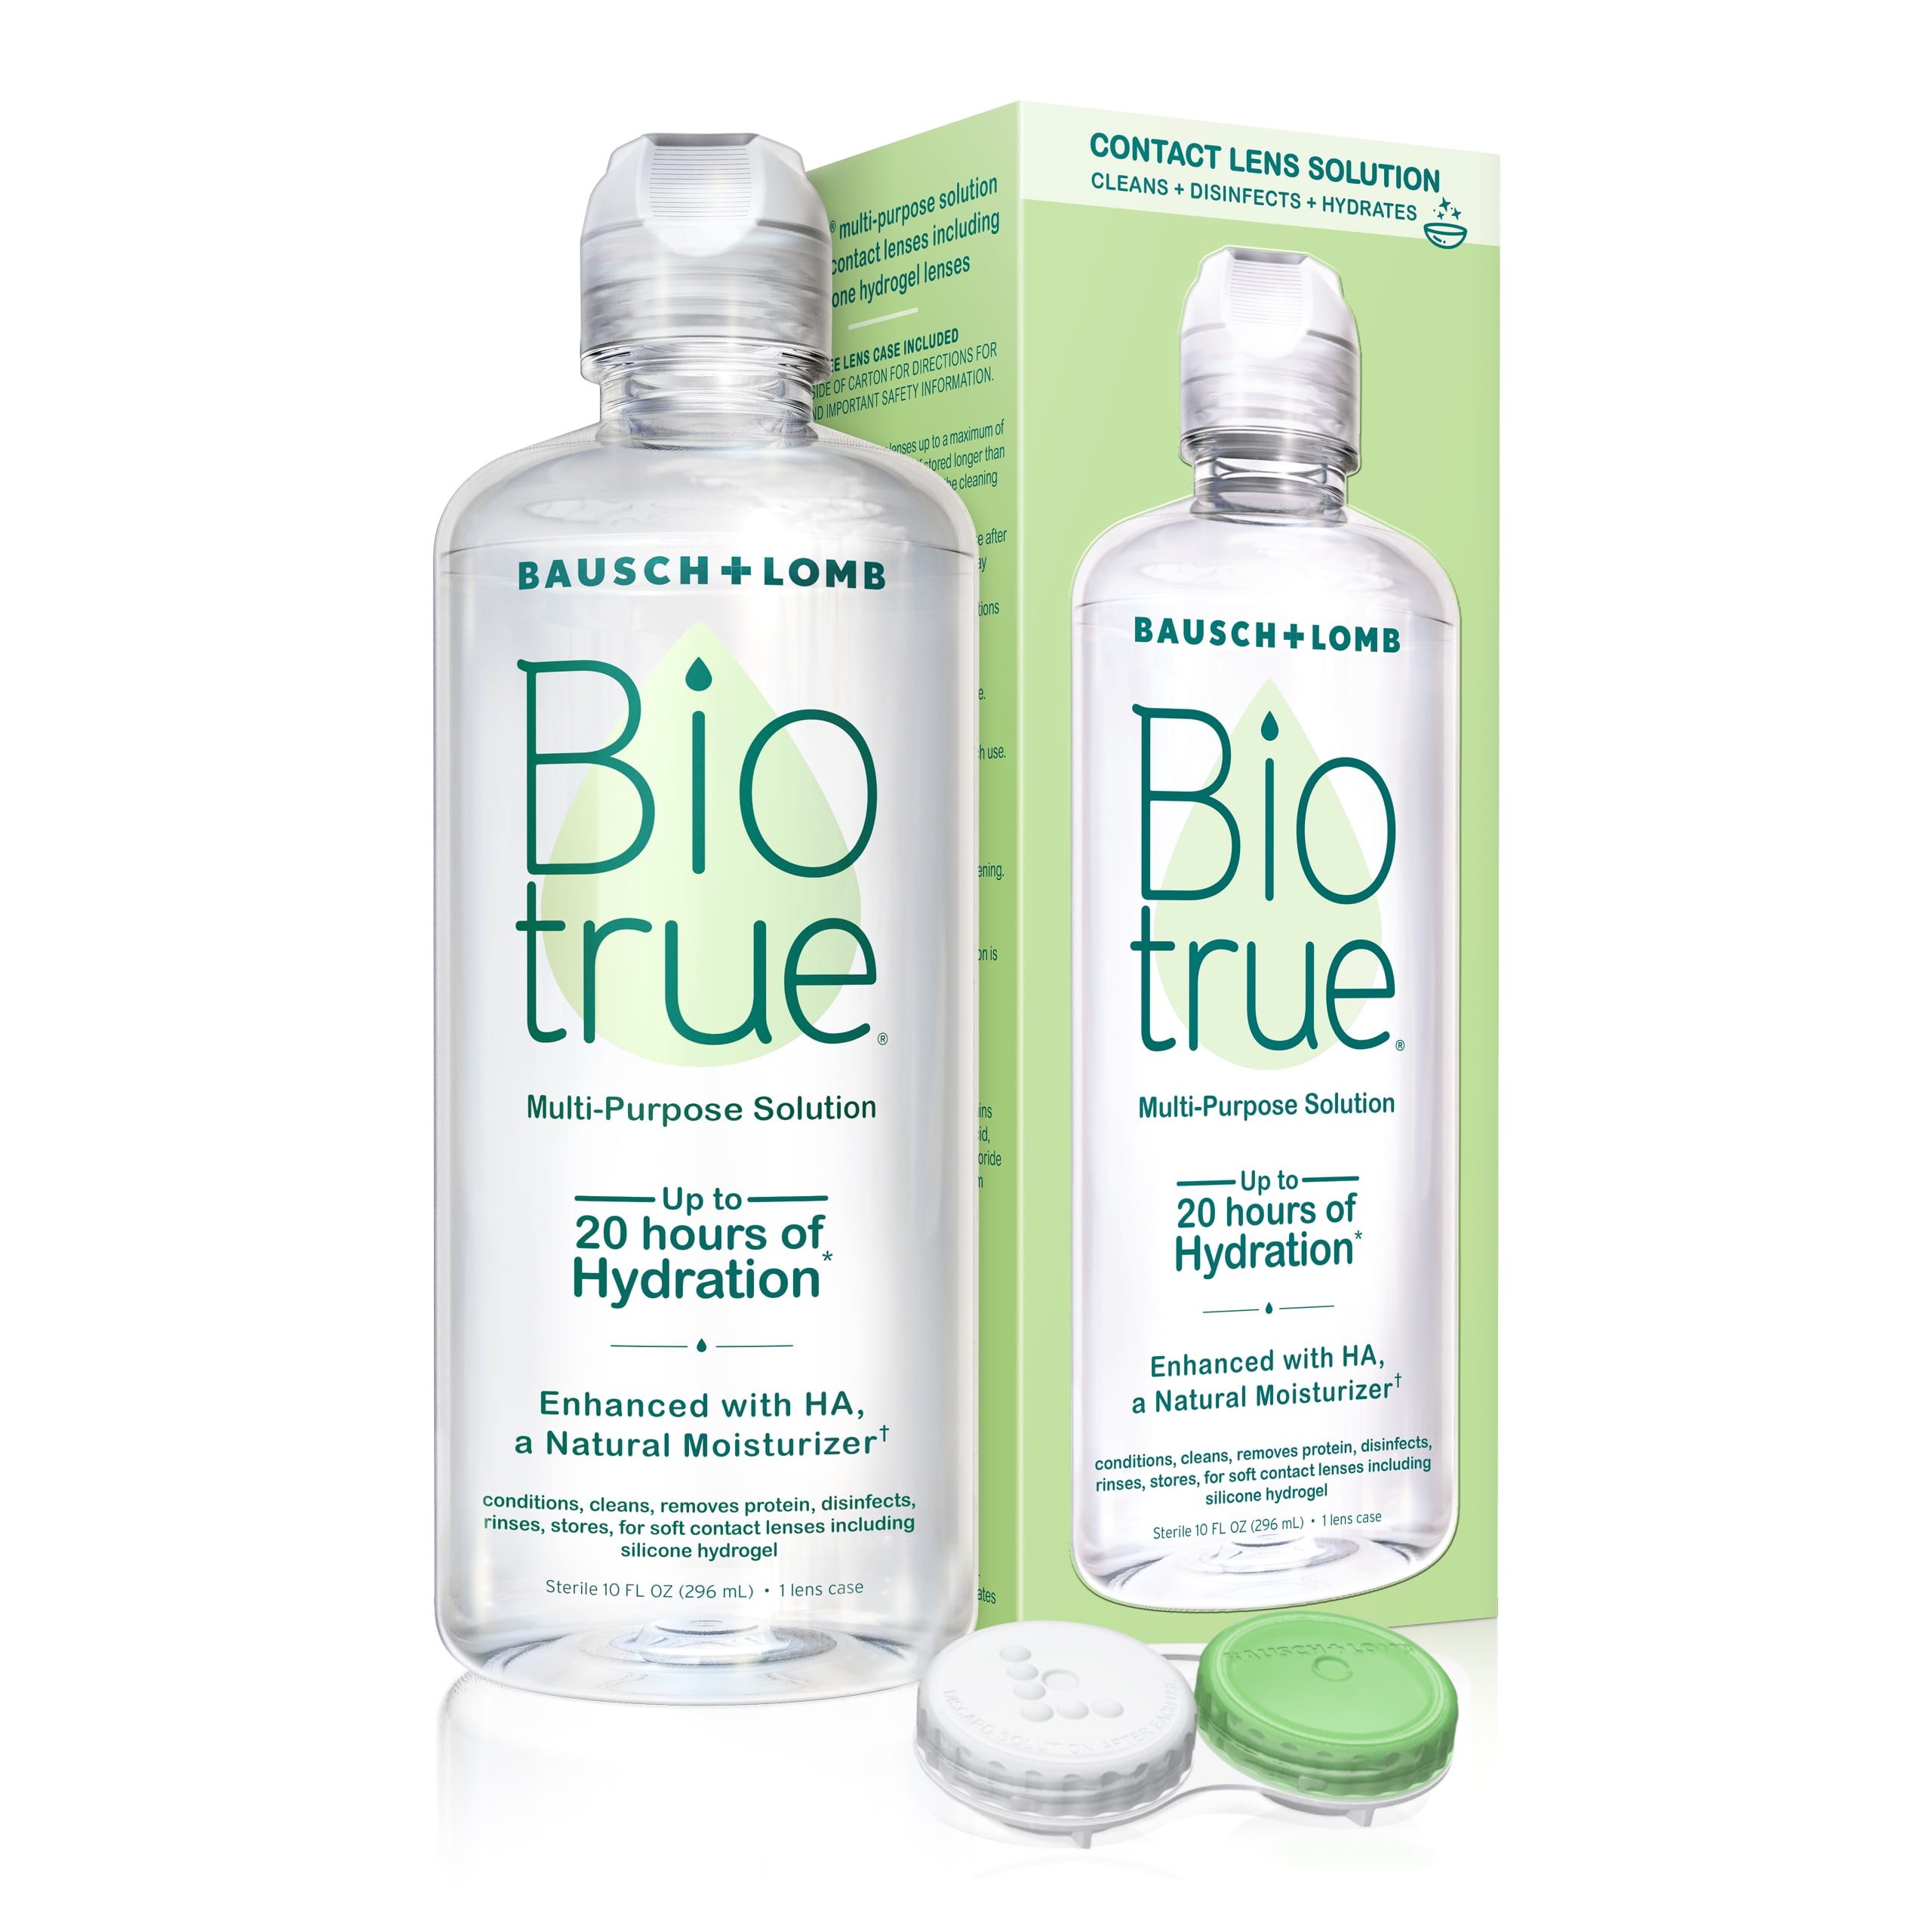 Biotrue Multi-Purpose Contact Lens Solutionfrom Bausch + Lomb 10 fl oz (296 mL) Bottle